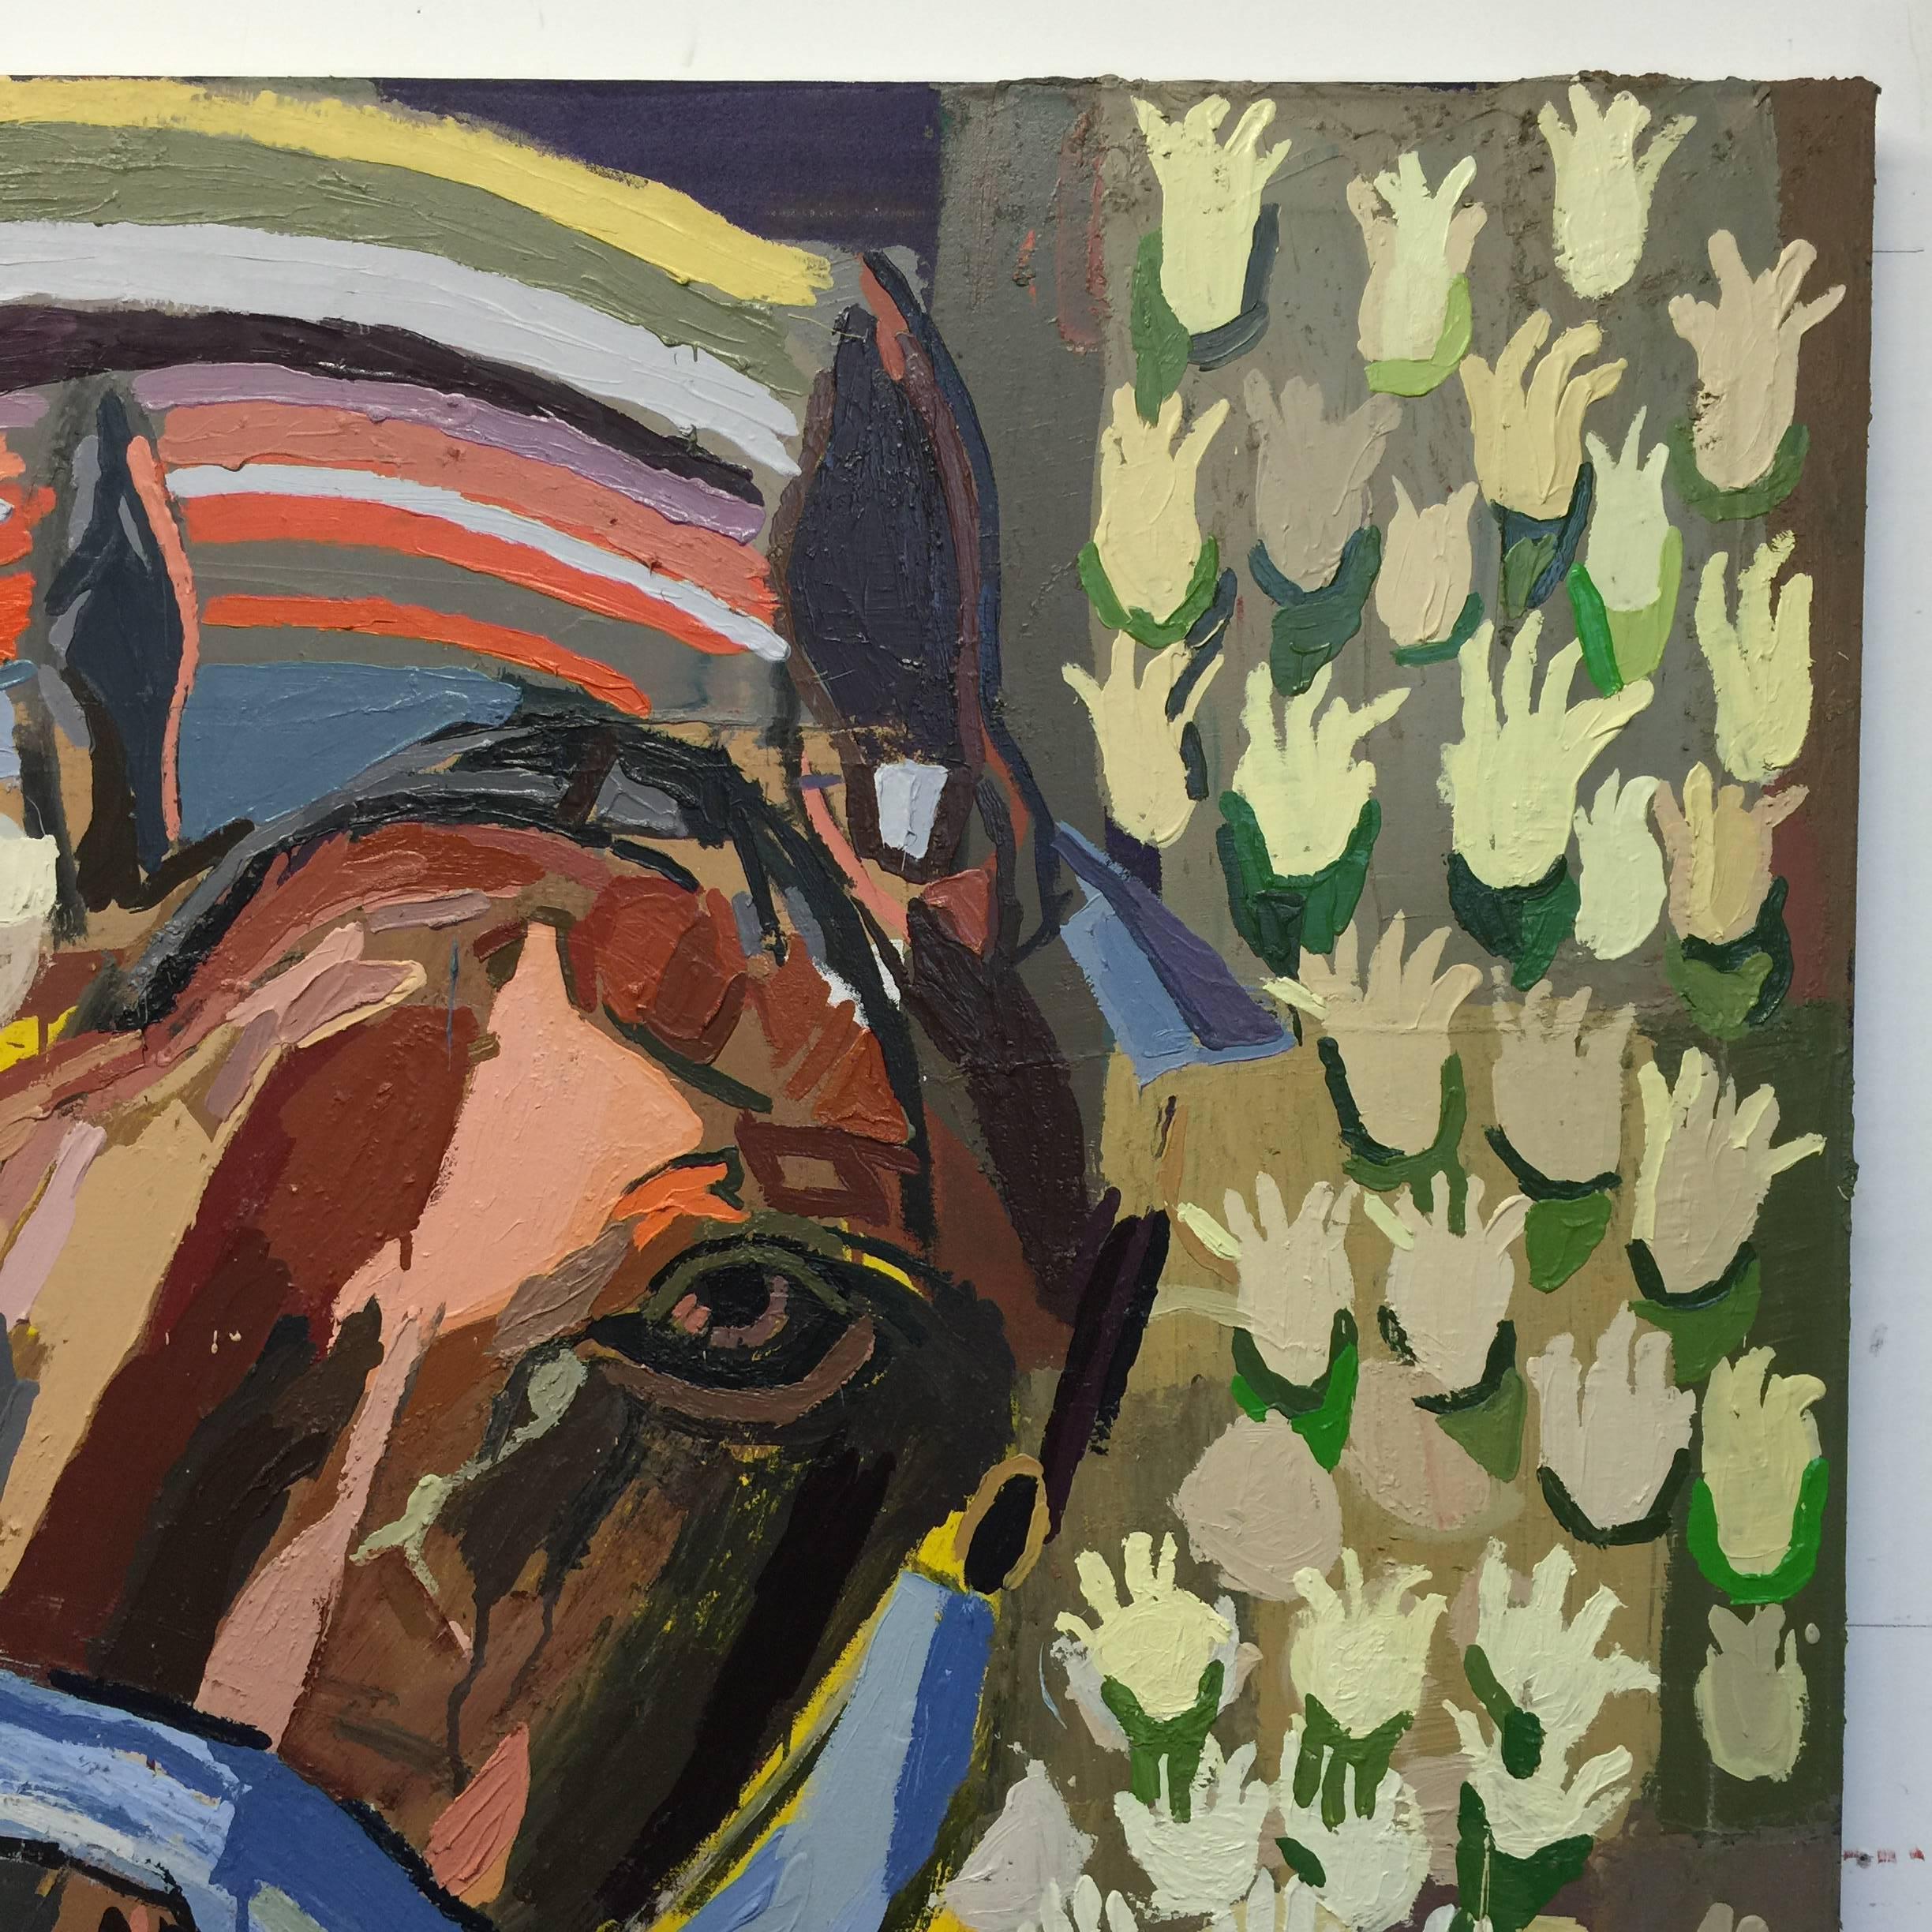 Painted American Pharoah Oil Painting by New York City Artist Clintel Steed, 2015 For Sale